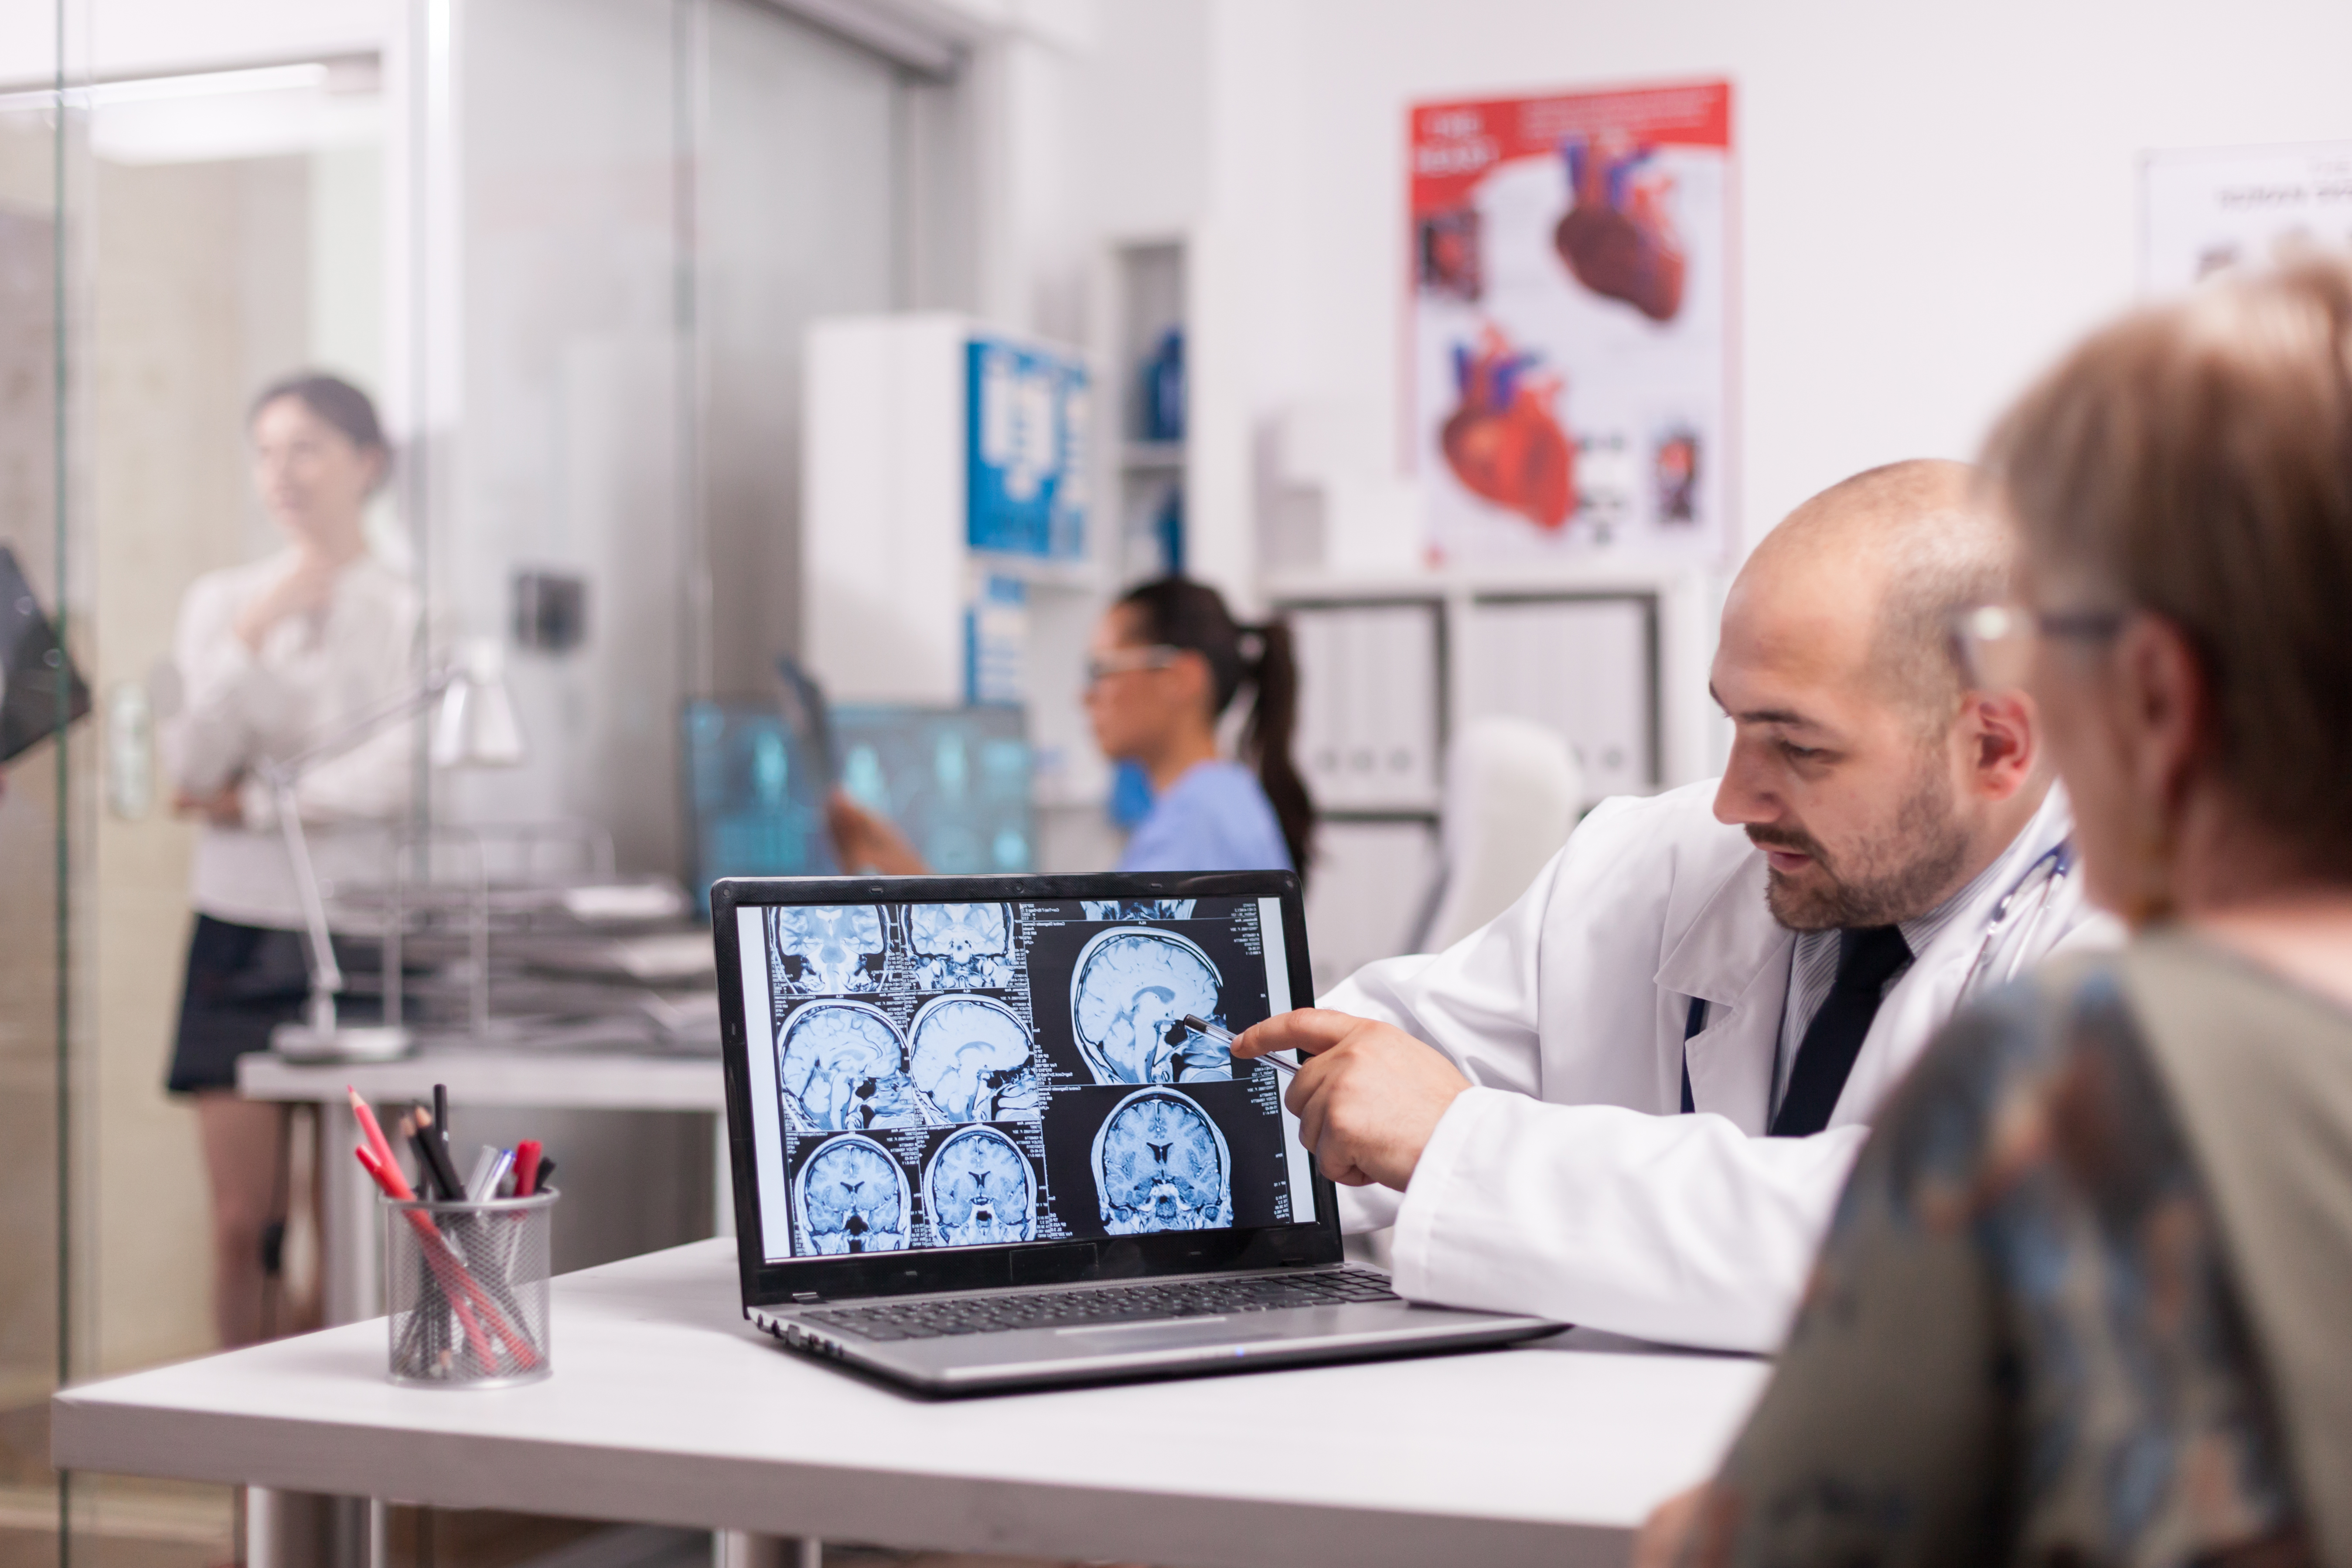 Man in white coat in conversation with a female patient while pointing at a laptop screen with a brain scan image